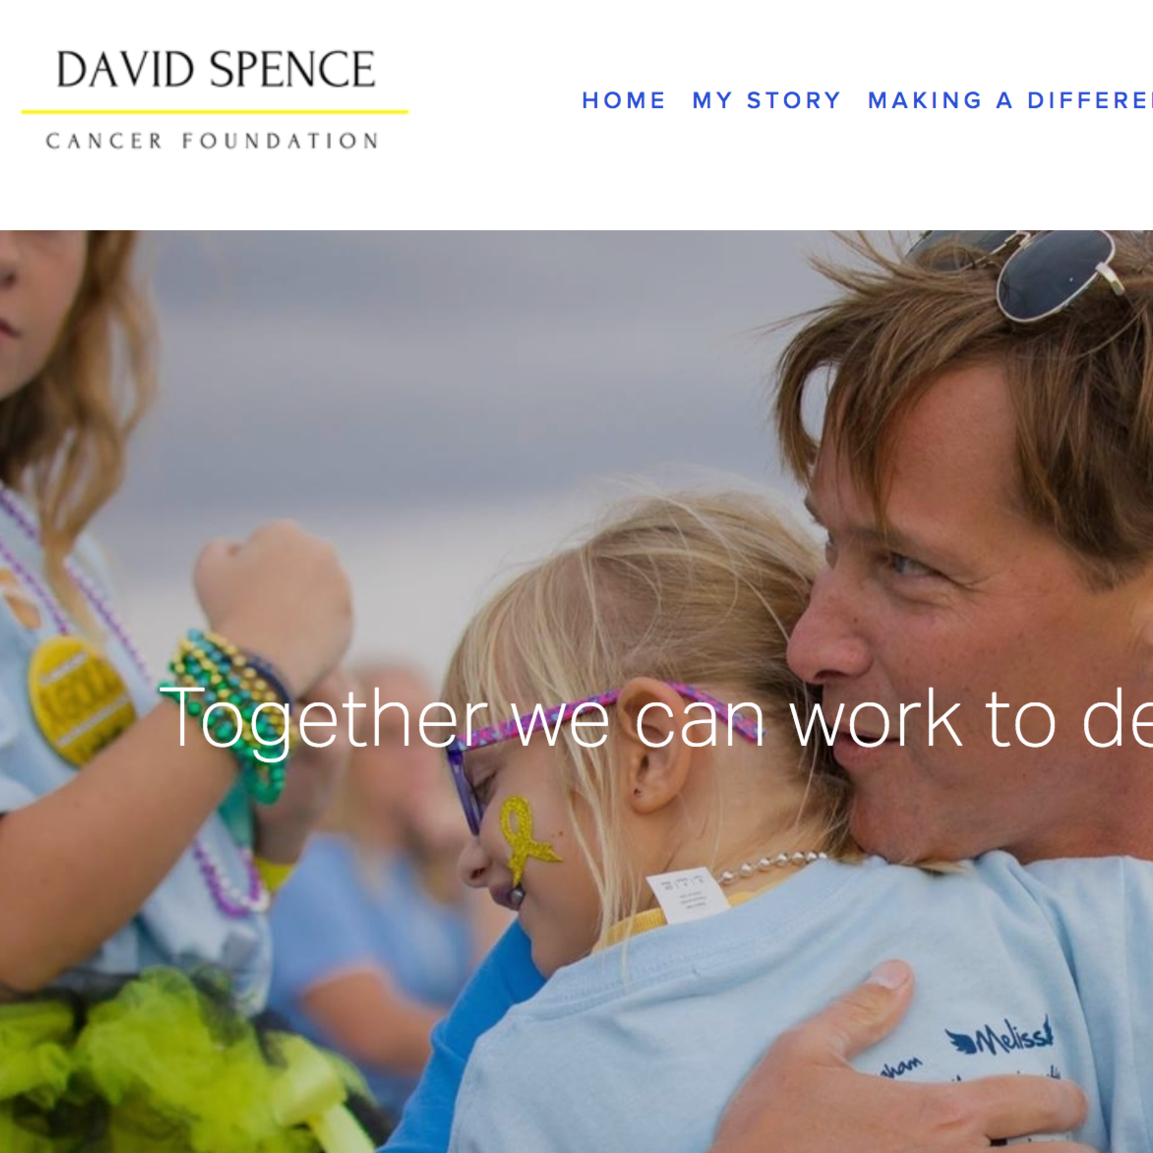 The David Spence Cancer Foundation